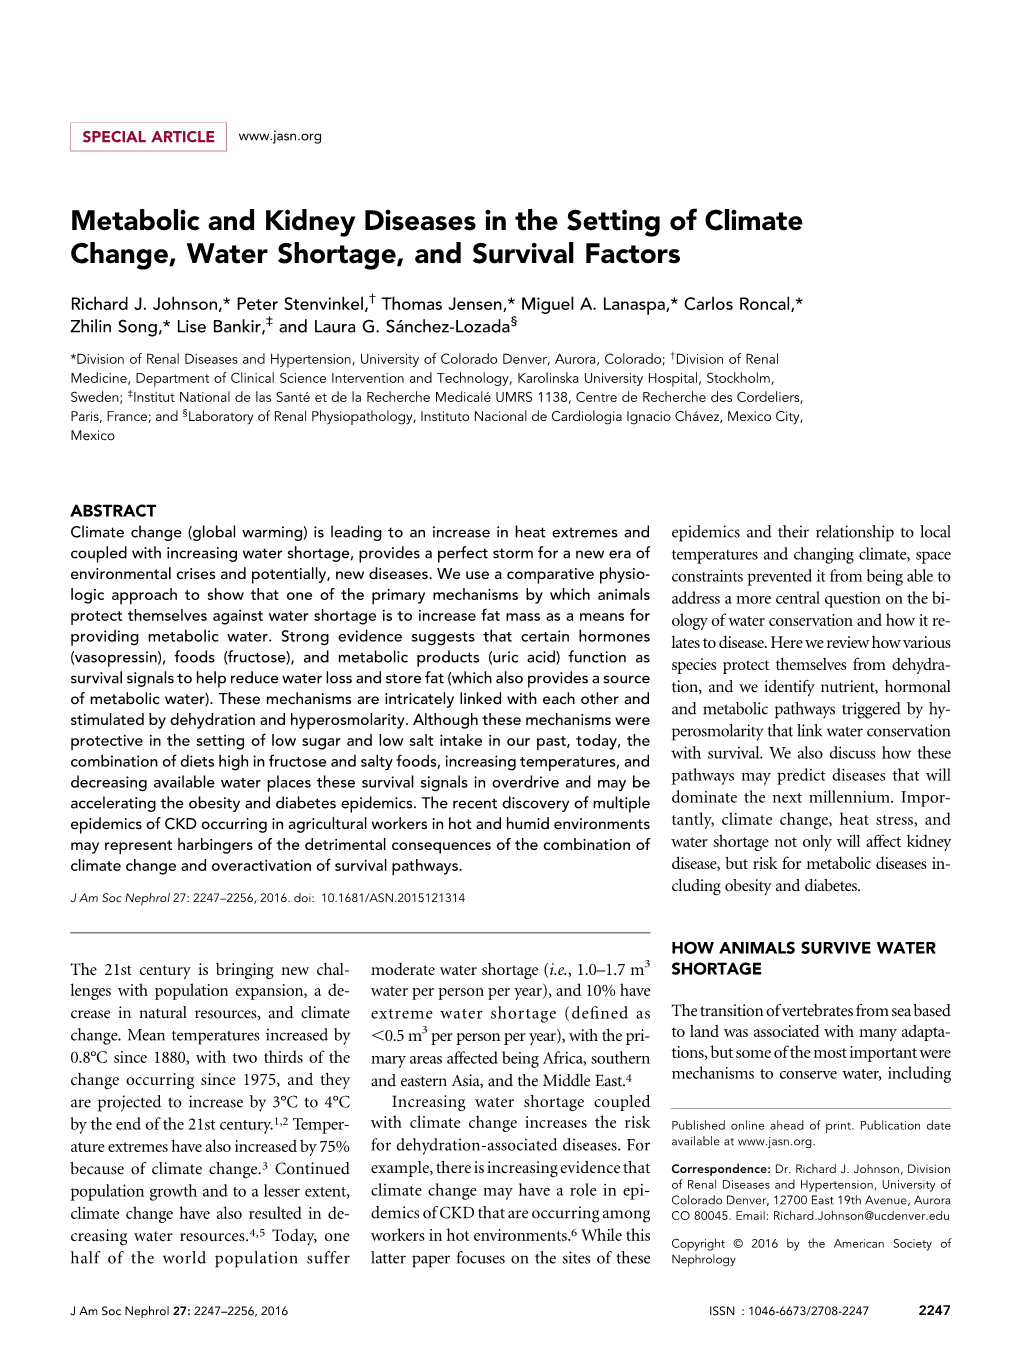 Metabolic and Kidney Diseases in the Setting of Climate Change, Water Shortage, and Survival Factors